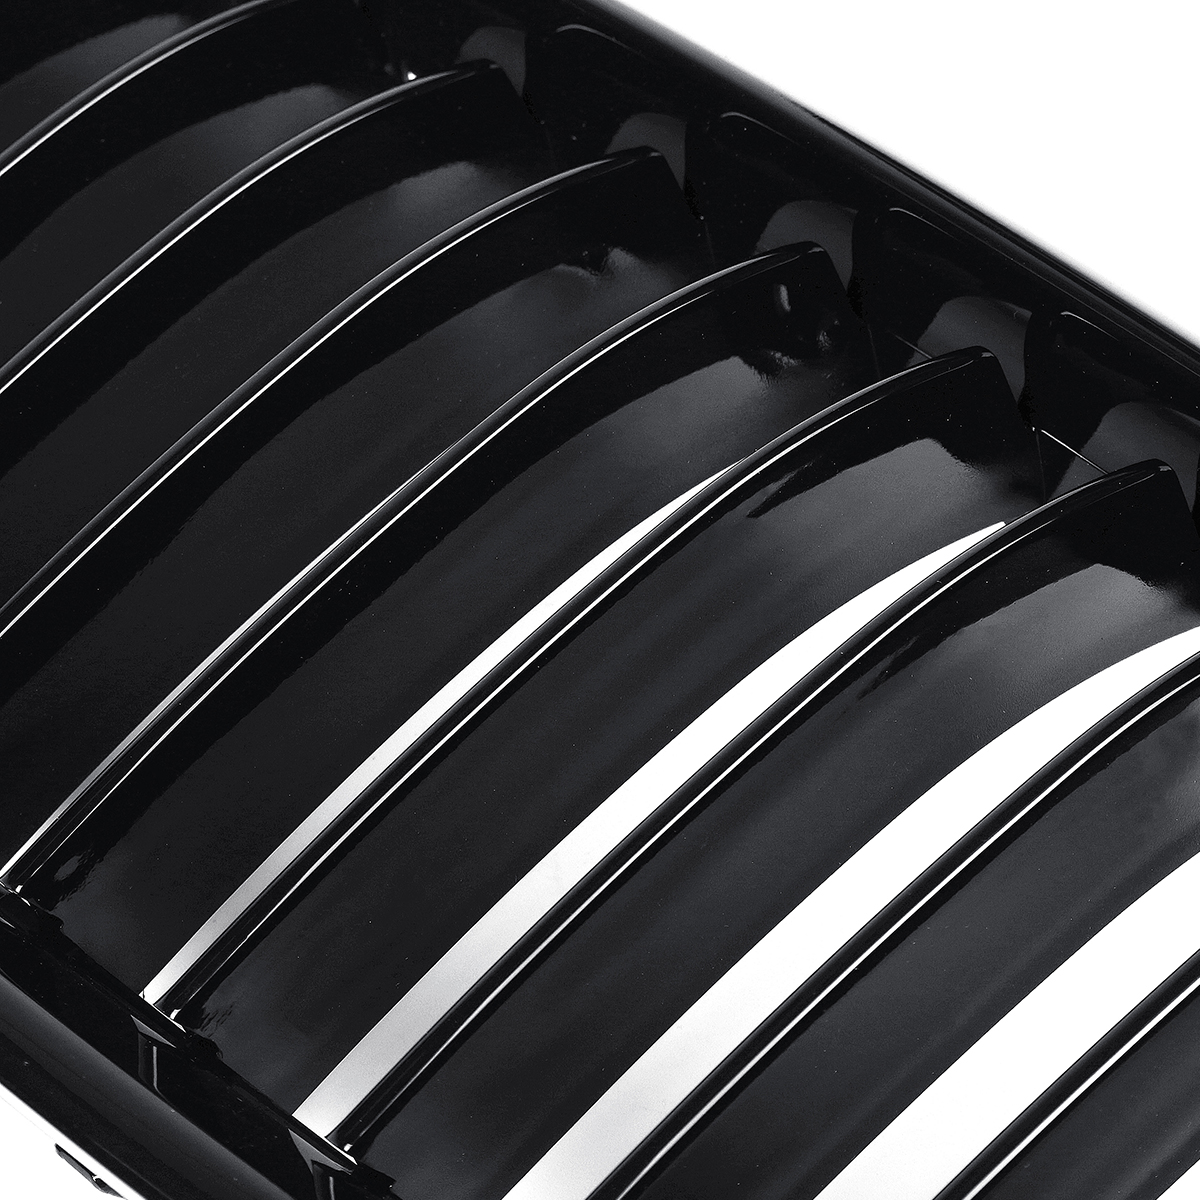 Pair Gloss Black Front Kidney Grille for BMW F30 F31 F35 320I 328I 330I